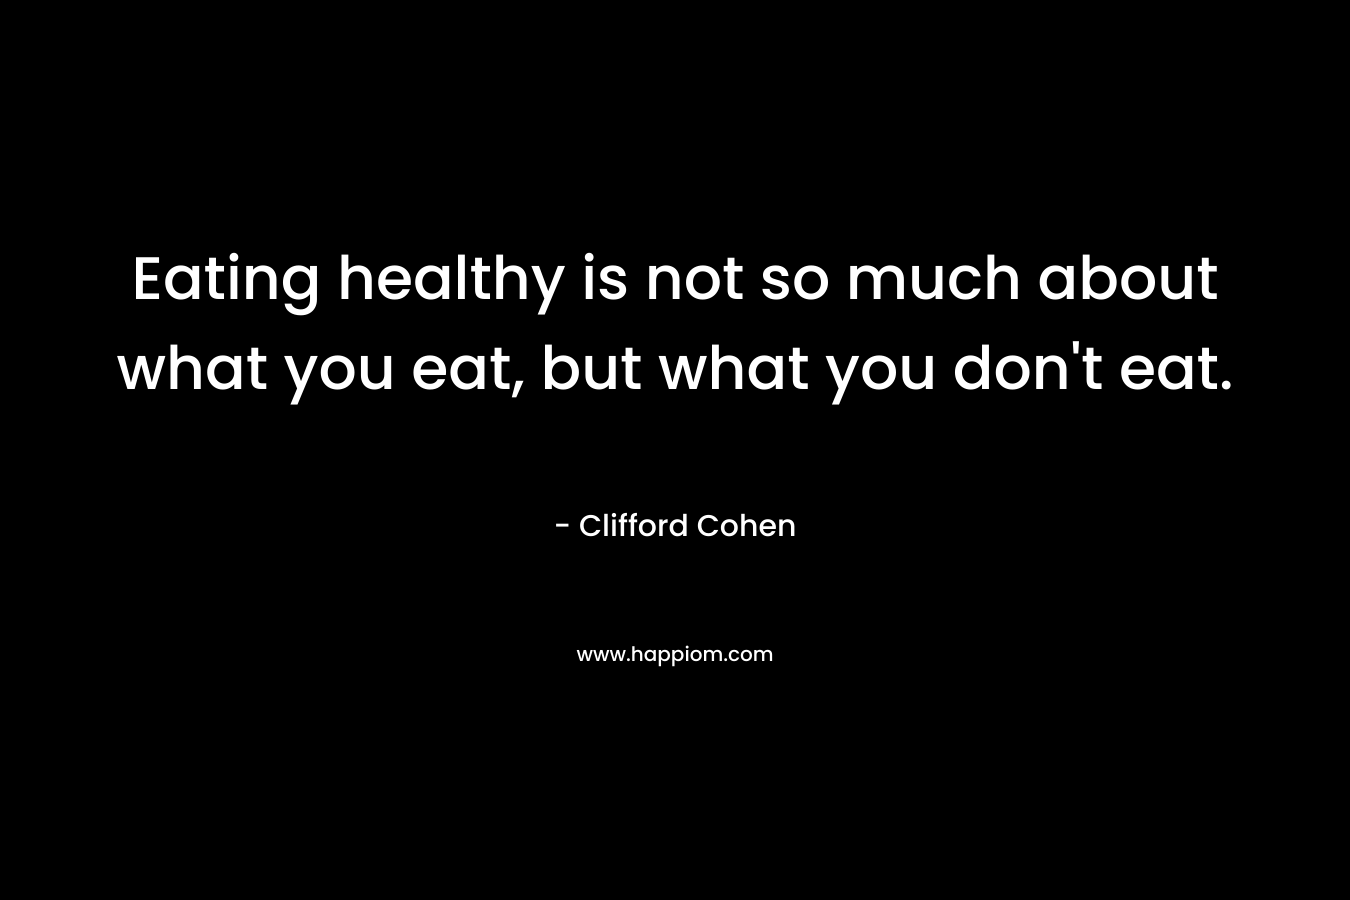 Eating healthy is not so much about what you eat, but what you don't eat.